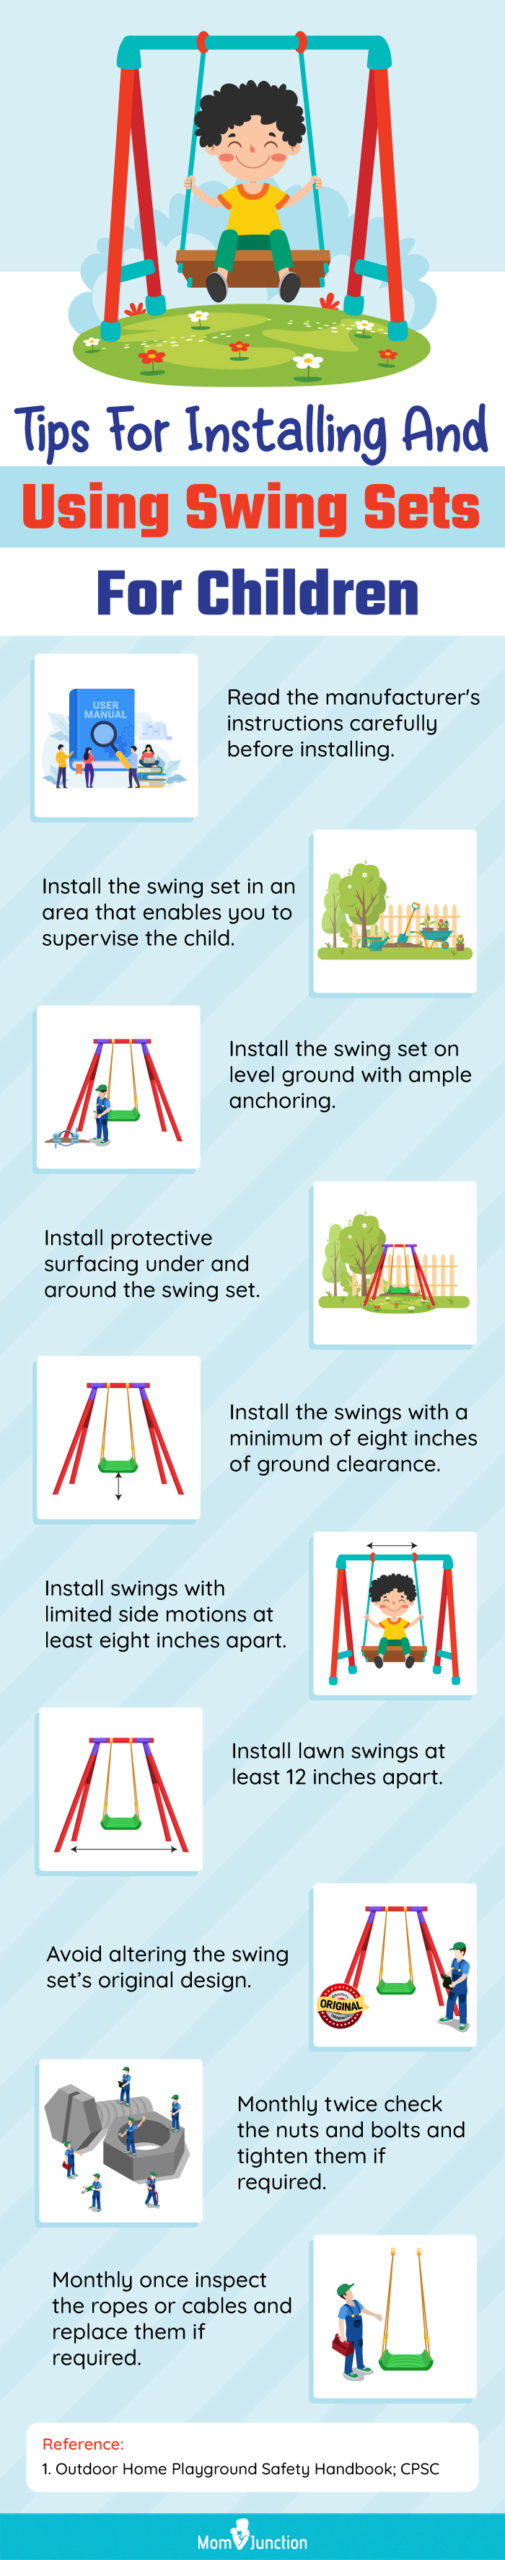 Tips For Installing And Using Swing Sets For Children (infographic)